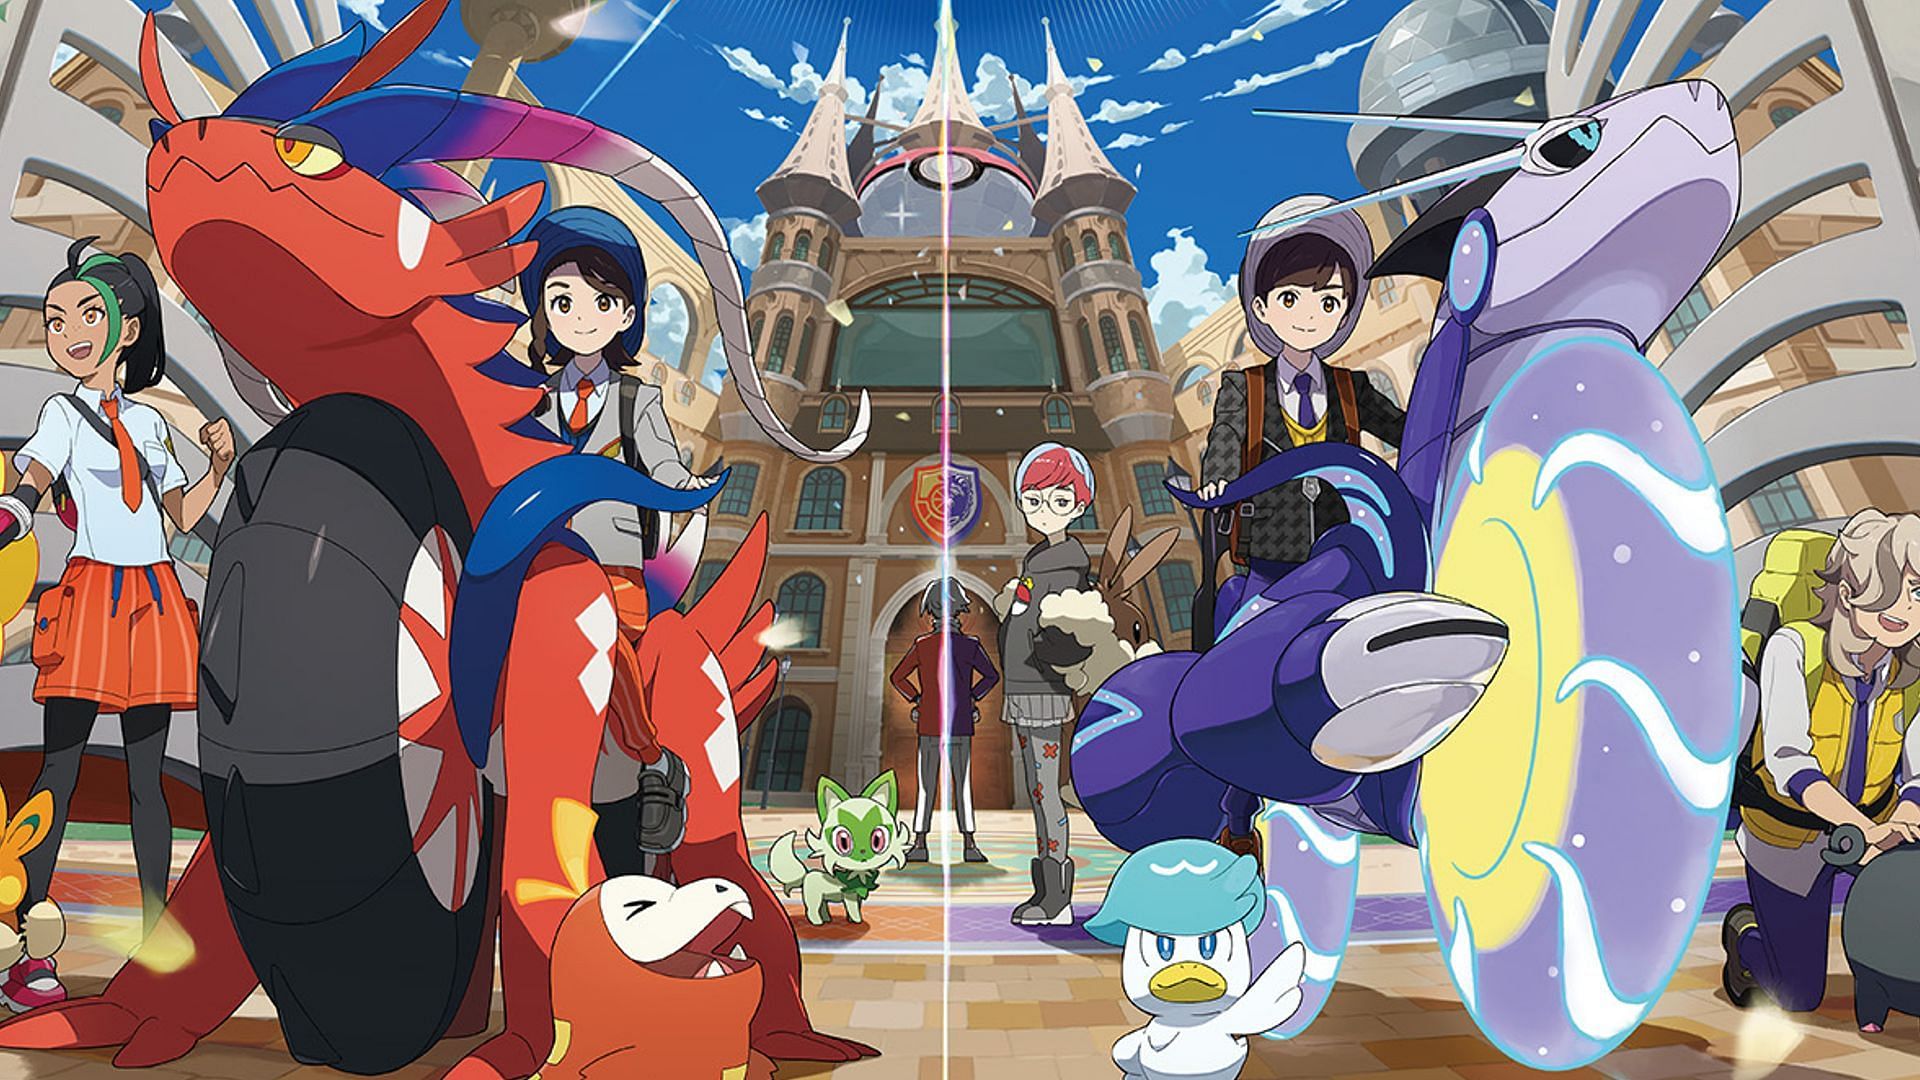 Pokemon Sword and Shield: Report suggests game is being tuned for